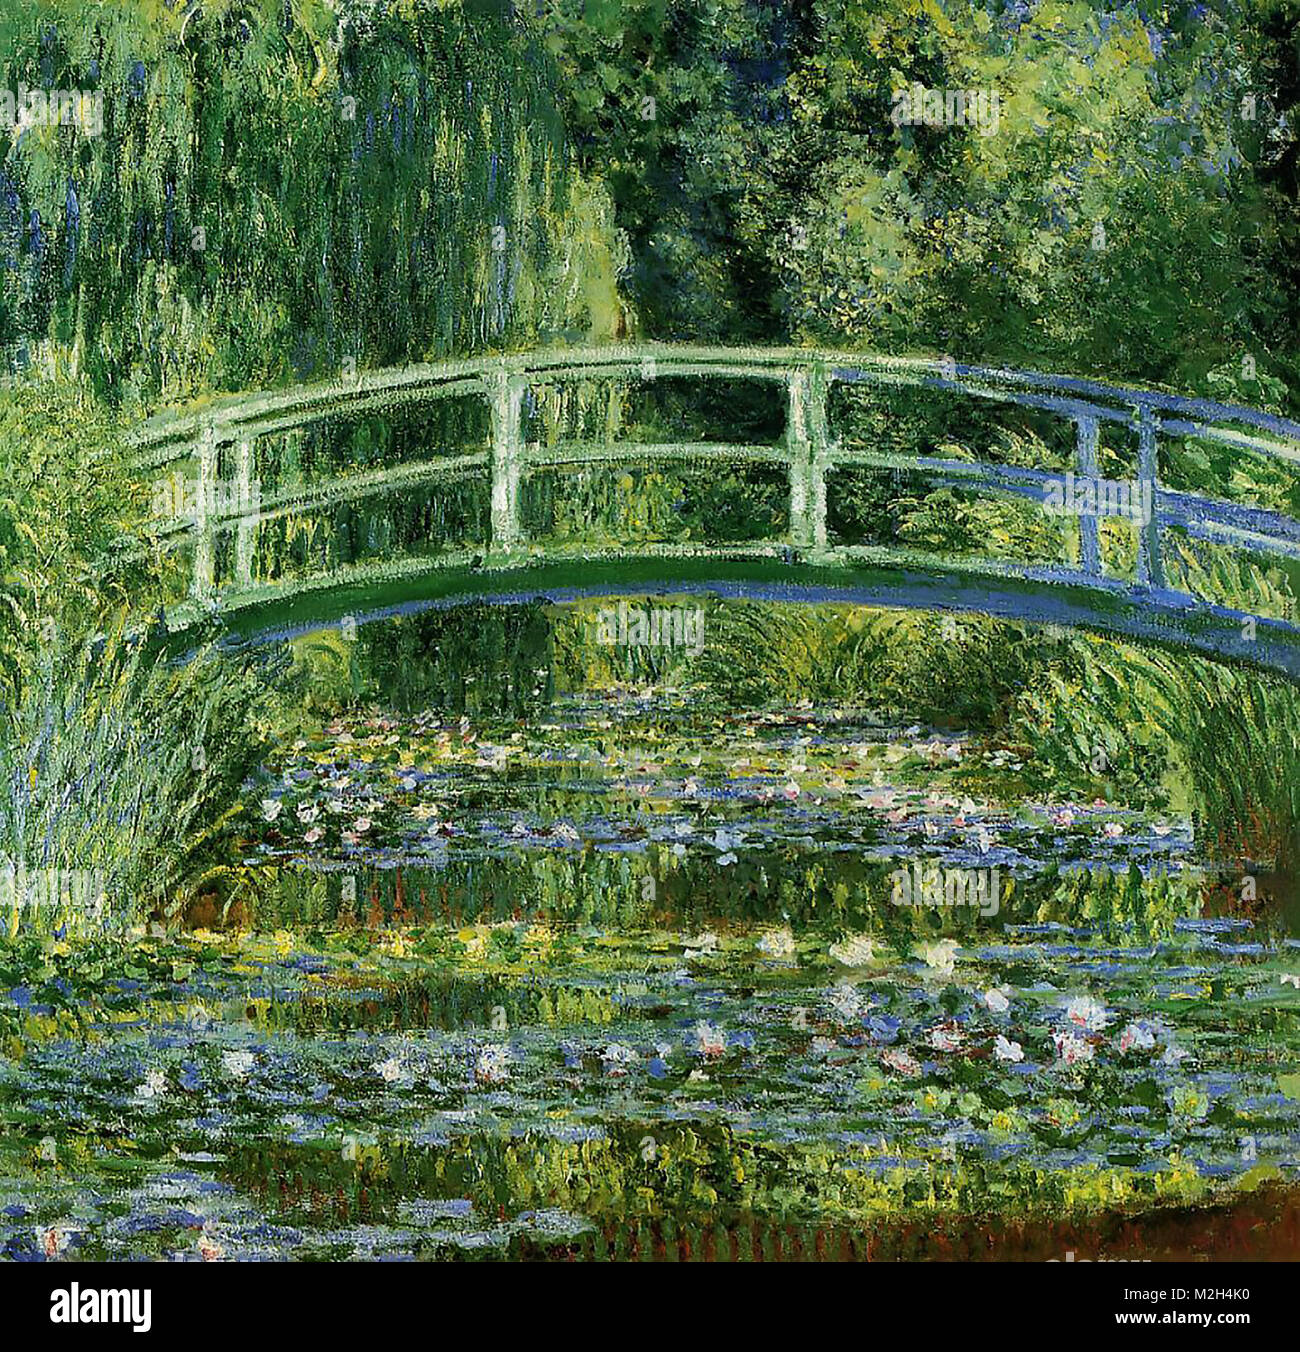 CLAUDE MONET (1840-1926) French Impressionist painter. His "Water Lilies and the Japanese bridge" painted 1897-1899 Stock Photo